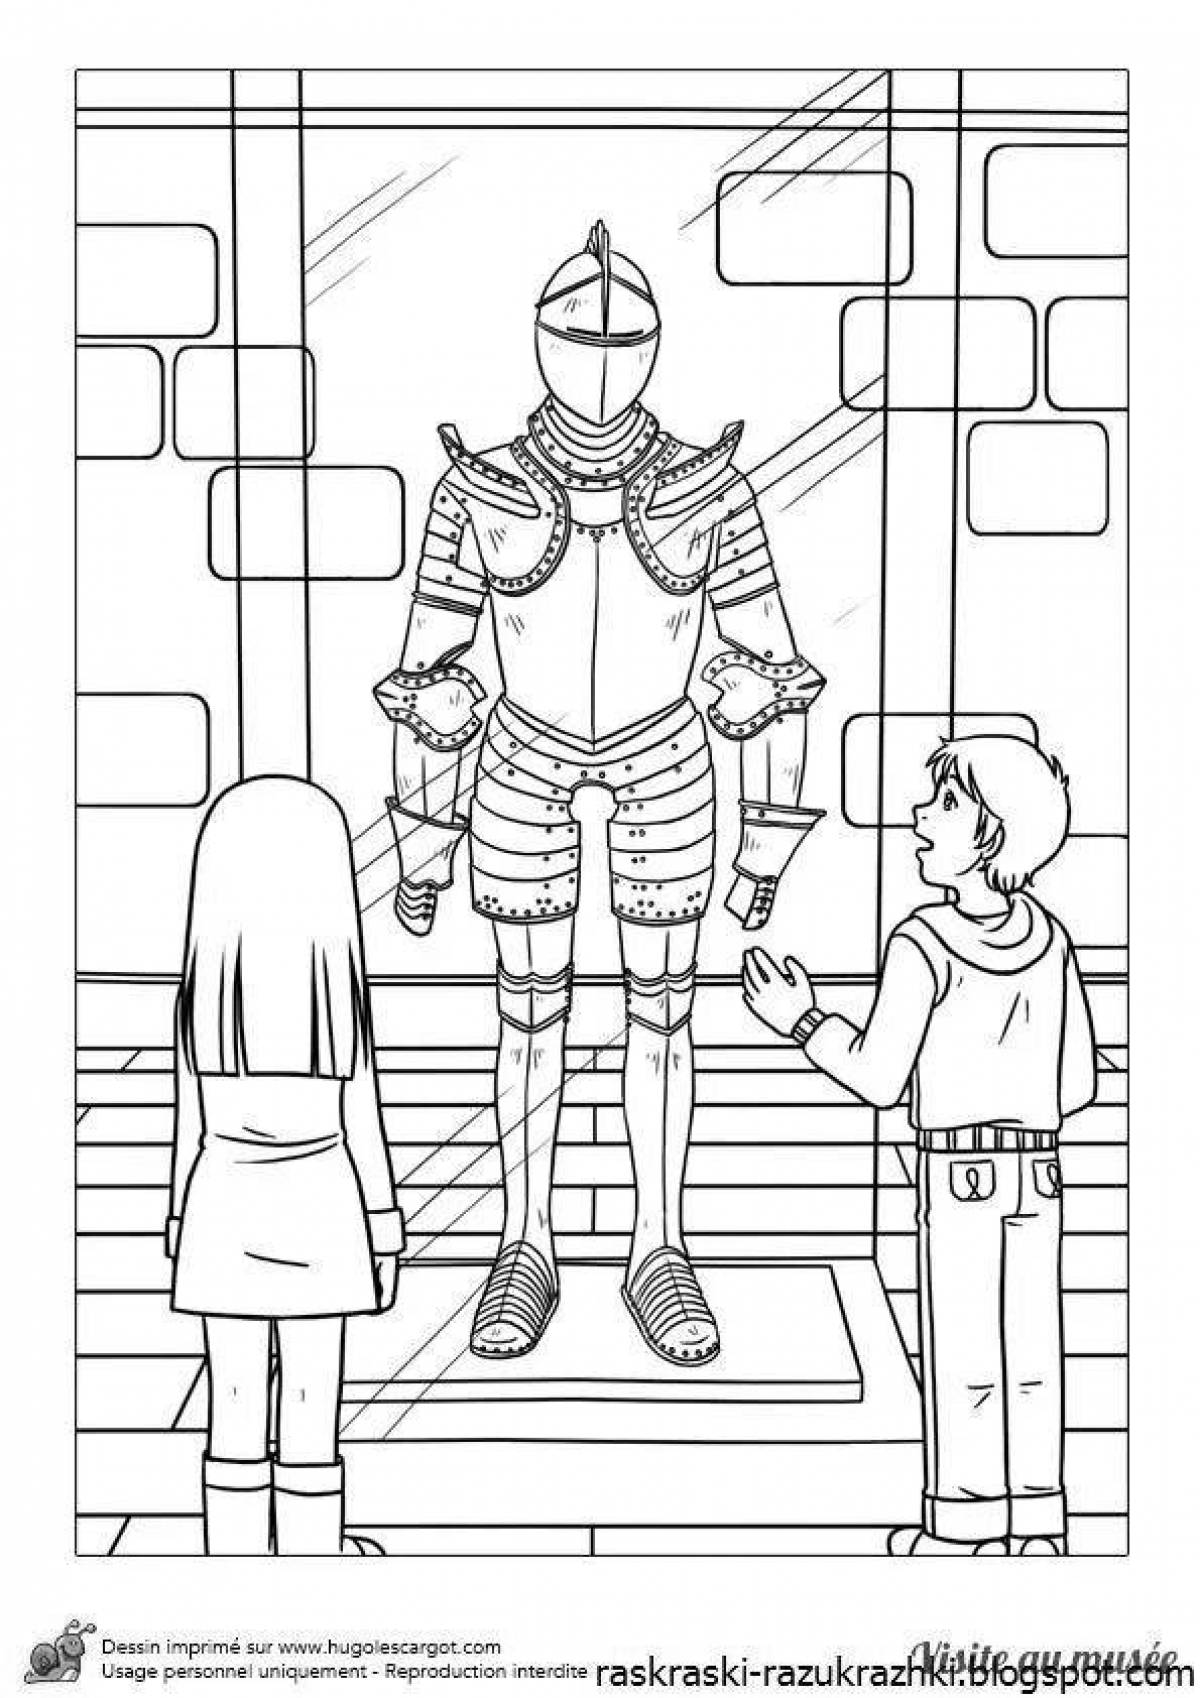 Museum of Elegant Coloring Pages